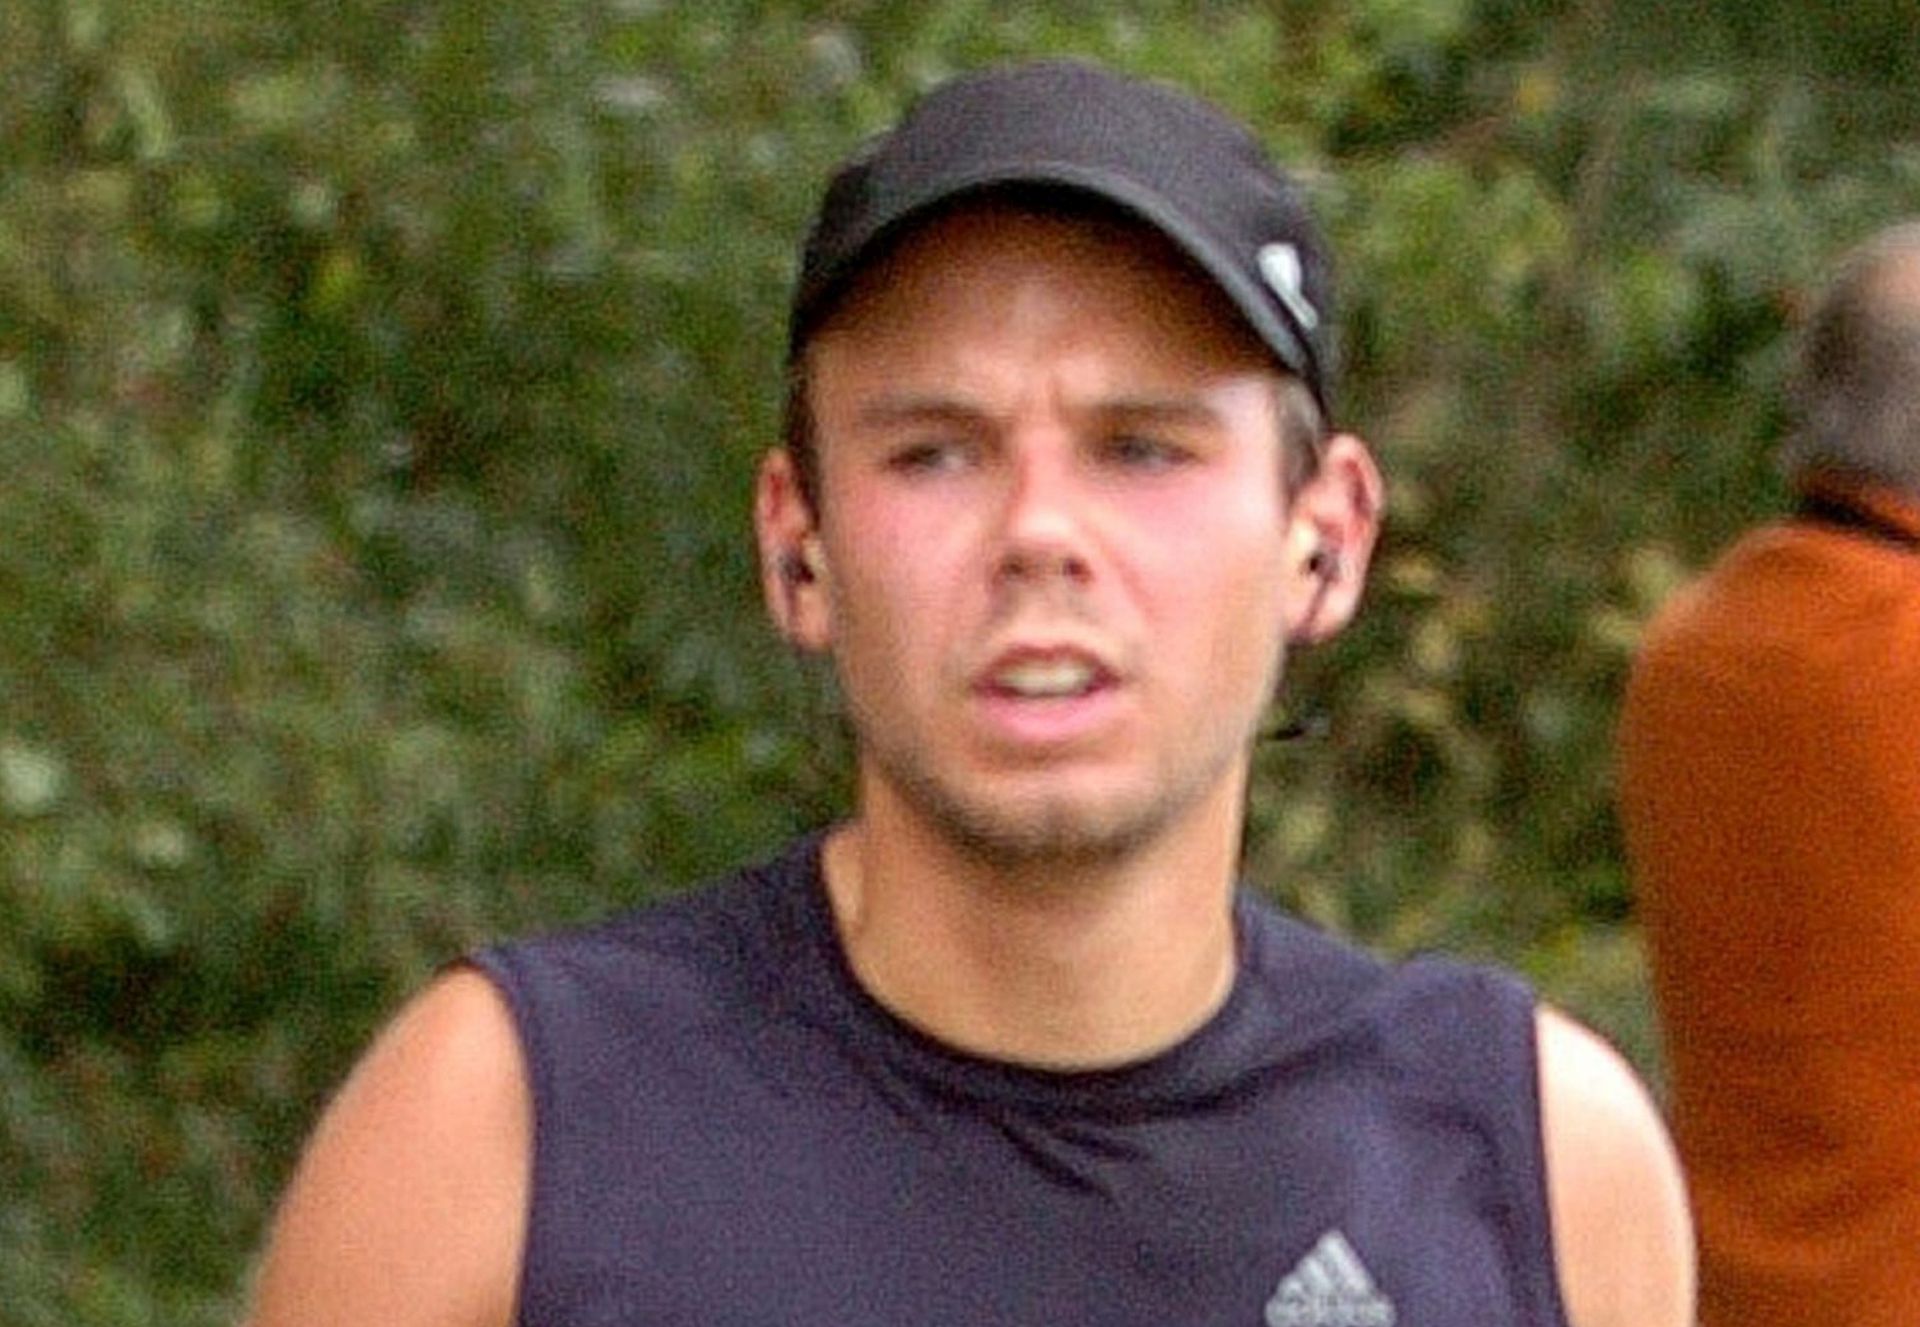 epa05209064 (FILE) A file picture showing Andreas Lubitz, co-pilot of Germanwings flight 4U9525, running during the Aerportrace in Hamburg, Germany, 13 September 2009. The French Le Bureau d'Enquetes et d'Analyses (French Land Transport Accident Investigation Bureau) (BEA), investigation unit report into the crash of Germanwings Flight 4U 9525 has been released in Le Bourget France on 13 March 2016. Germanwings Flight 4U 9525, carrying 144 passengers and six crew members from Barcelona, Spain to Duesseldorf, Germany, crashed 24 March in the French Alps.  EPA/FOTO-TEAM-MUELLER